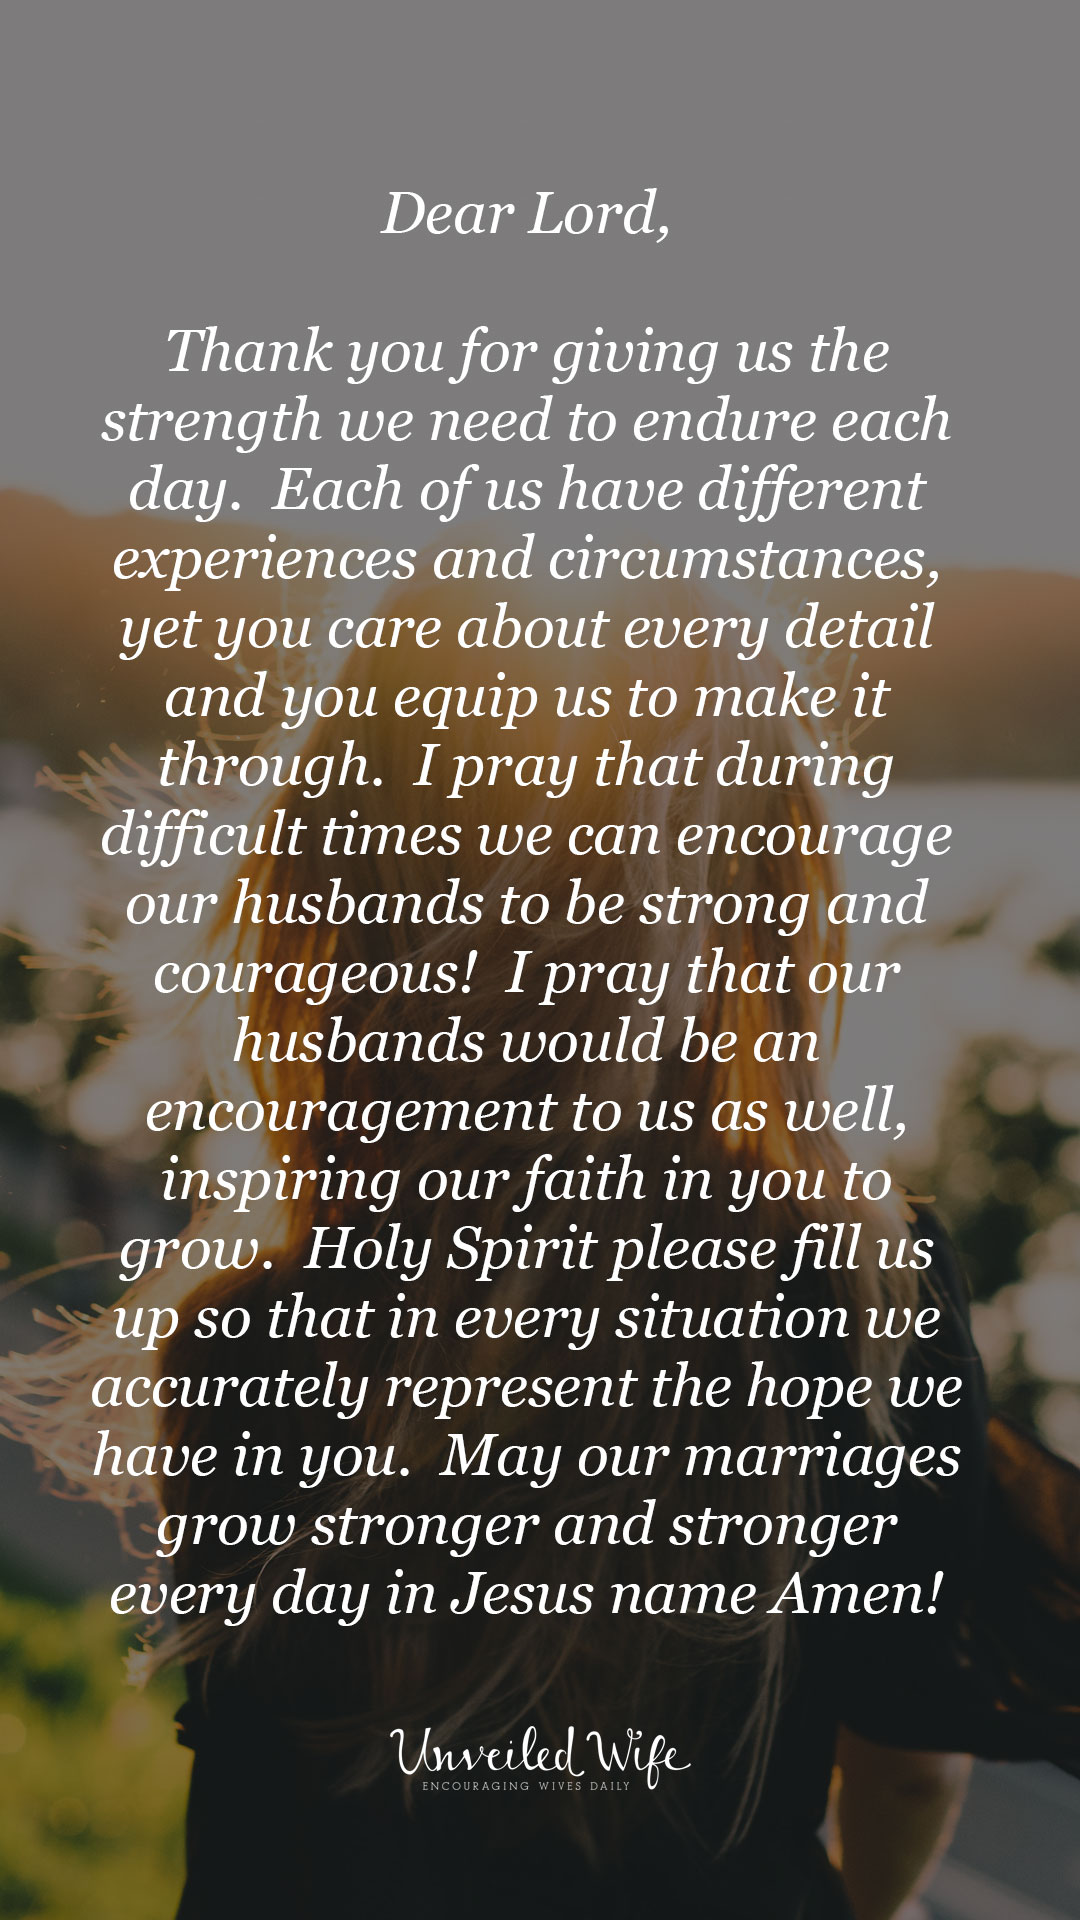 Prayer Of The Day - Being Strong & Courageous